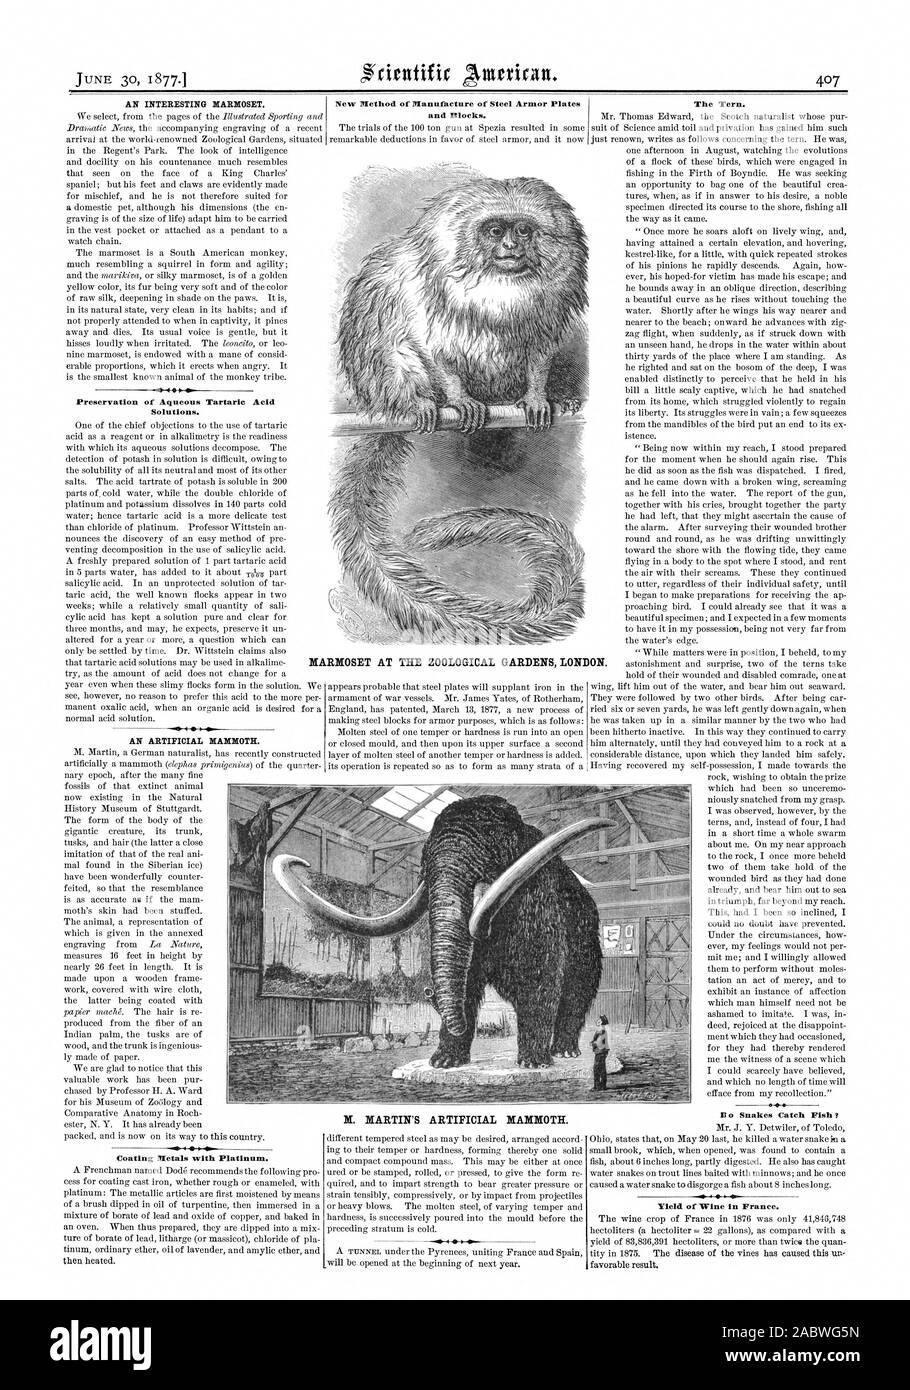 Preservation of Aqueous Tartaric Acid Solutions. A i Coating Metals with Platinum. New Method of Manufacture of Steel Armor Plates and Blocks. The Tern. Yield of Wine in France. MARMOSET AT THE ZOOLOGICAL GARDENS LONDON., scientific american, 1877-06-30 Stock Photo